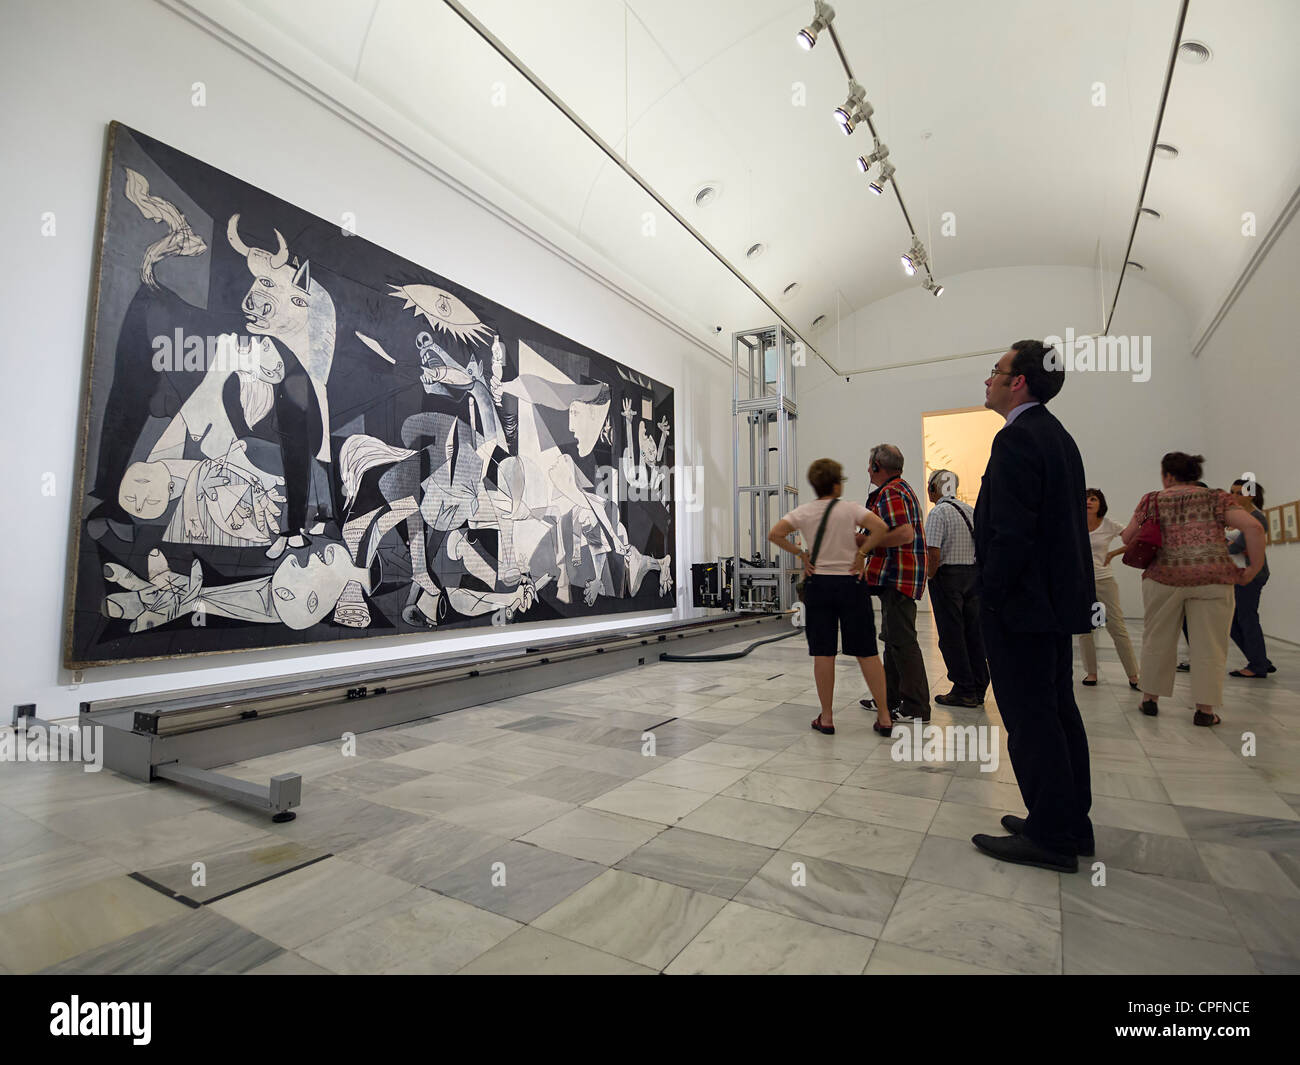 Visitors looking at 'Guernica' painting by Pablo Picasso at the Reina Sofia modern art museum in Madrid, Spain Stock Photo